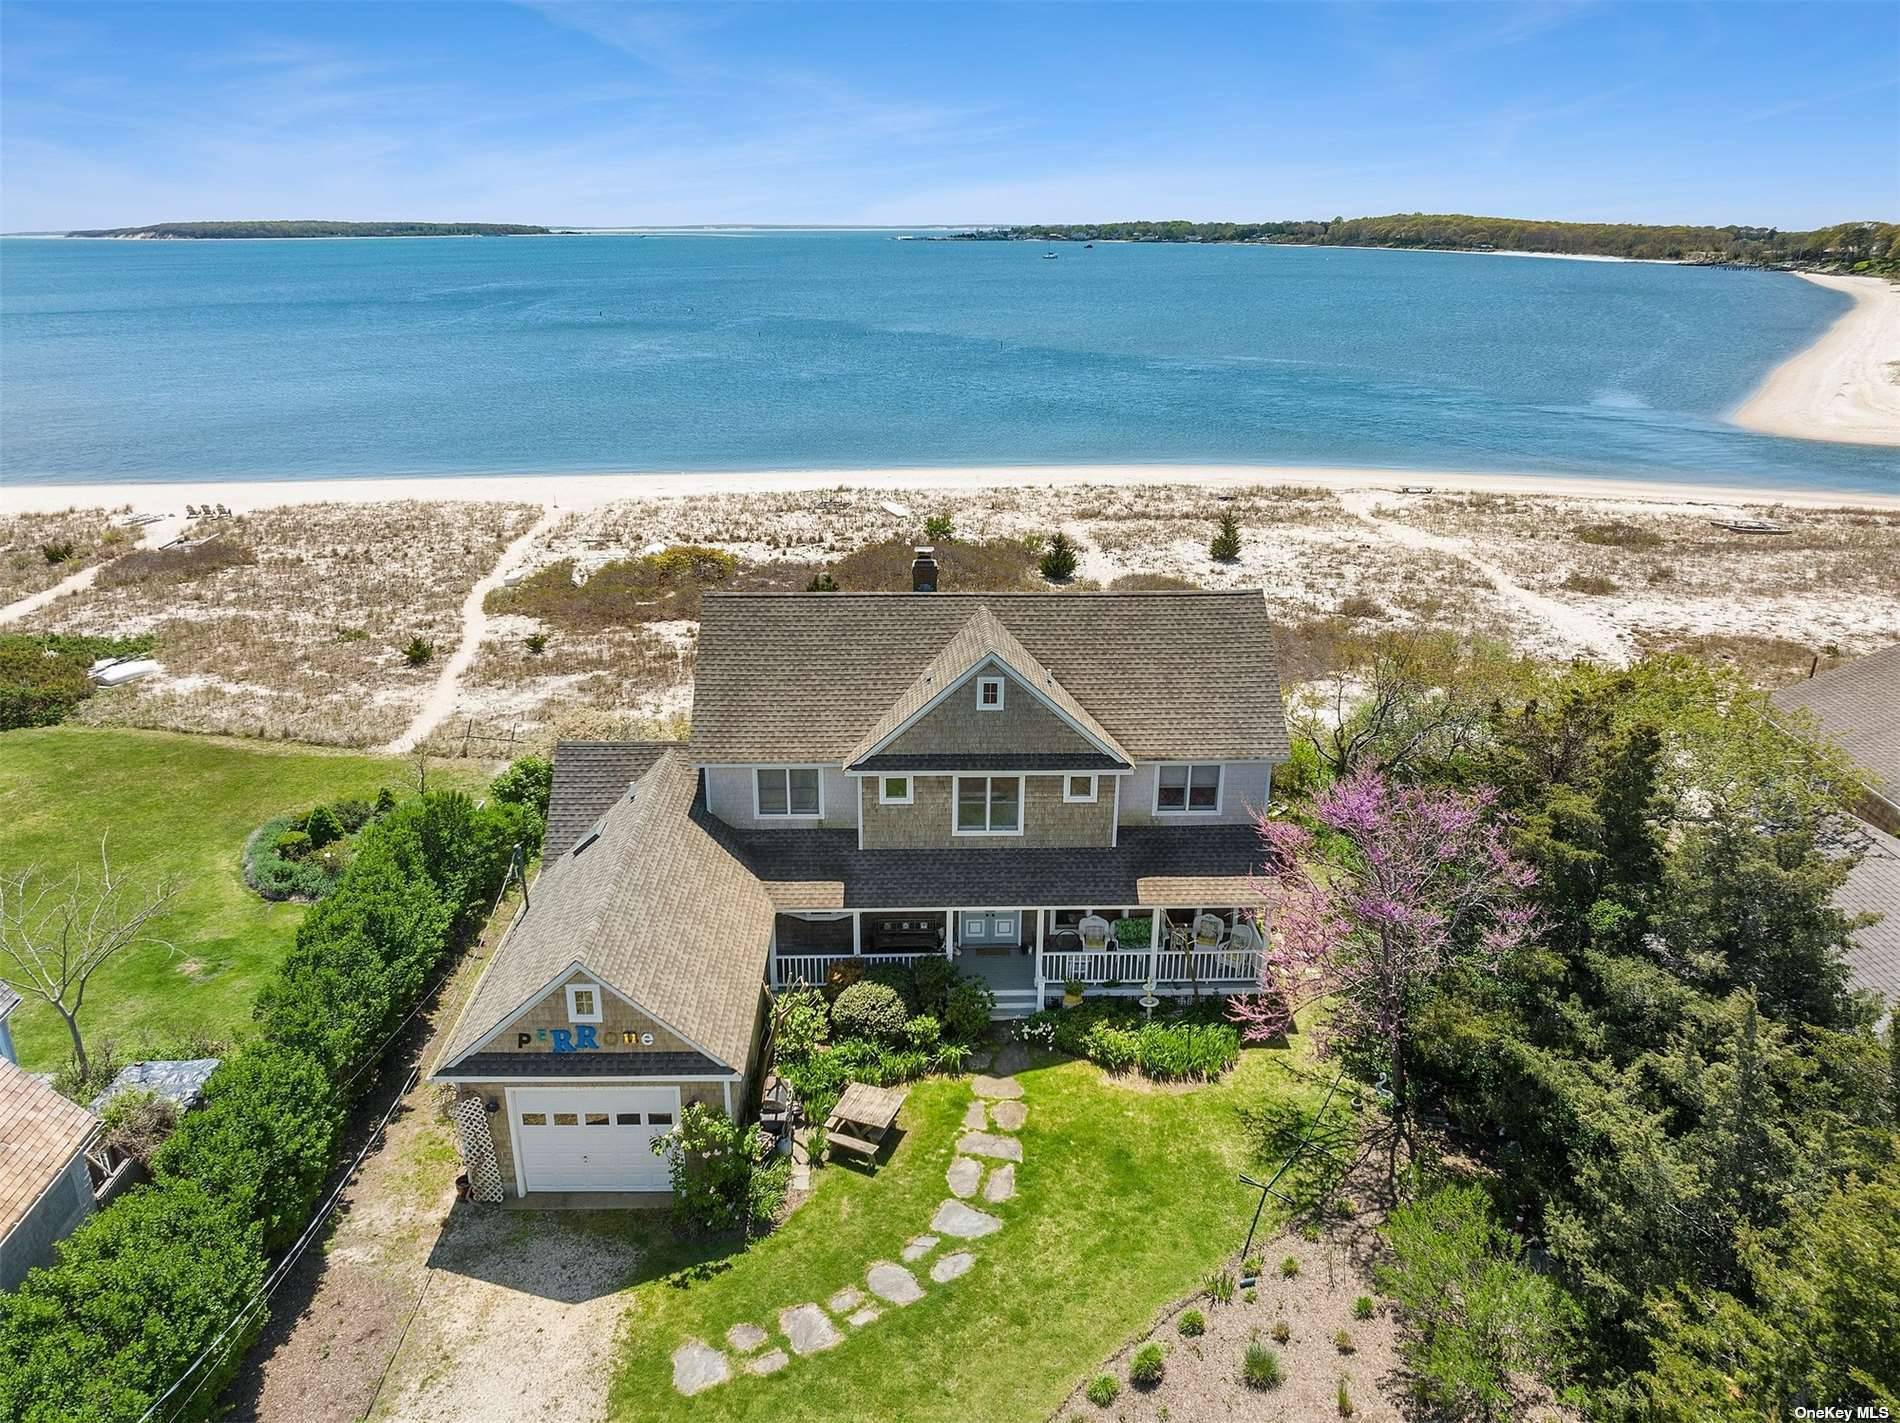 Nassau Point Gem Nestled Between Peconic Bay And The Protection Of Haywaters Cove.